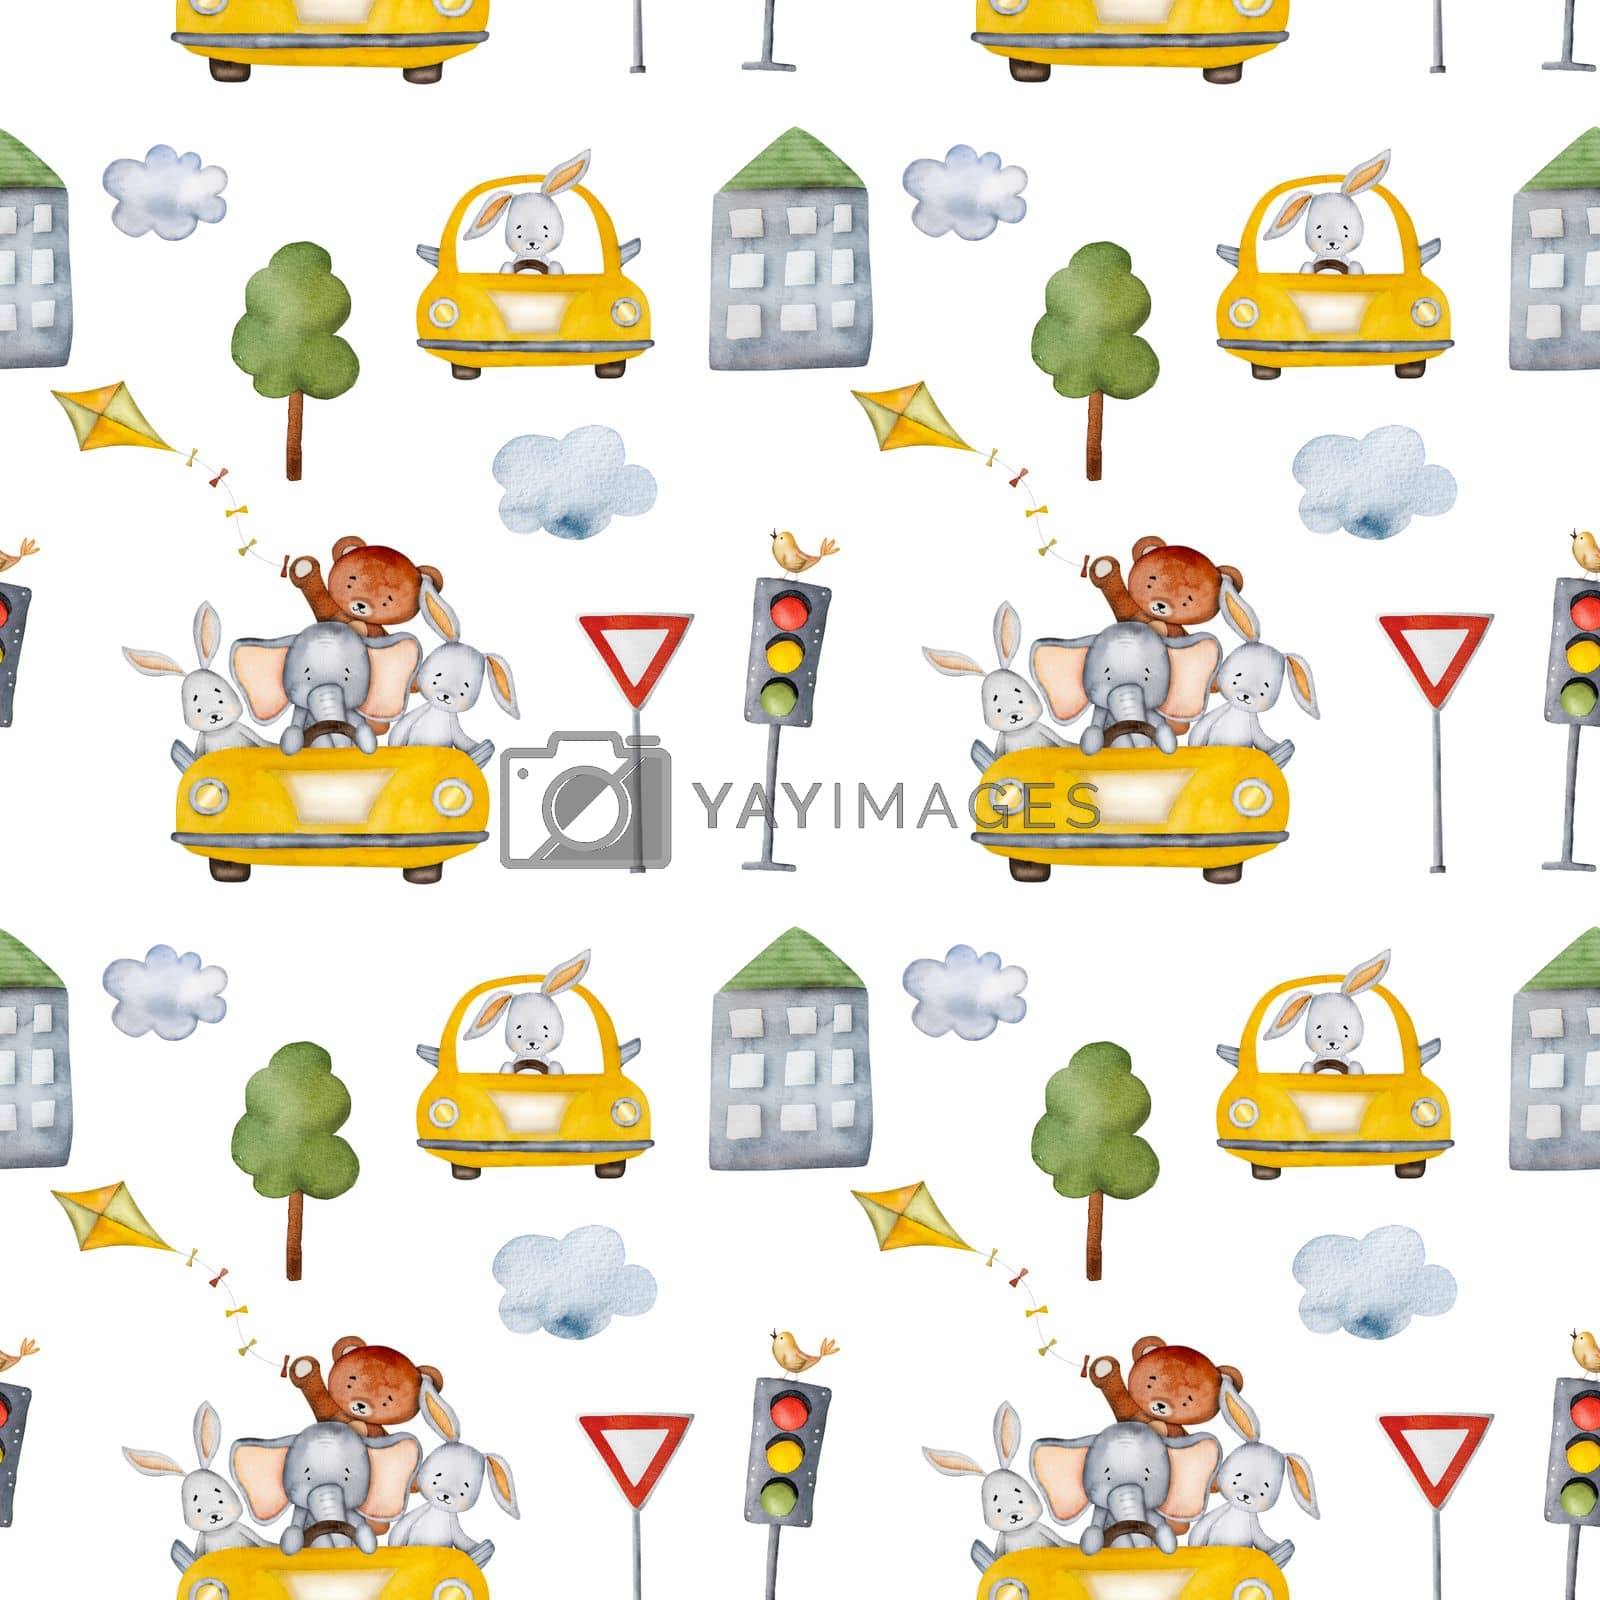 Royalty free image of Cartoon animals in yellow car watercolor painting by tan4ikk1